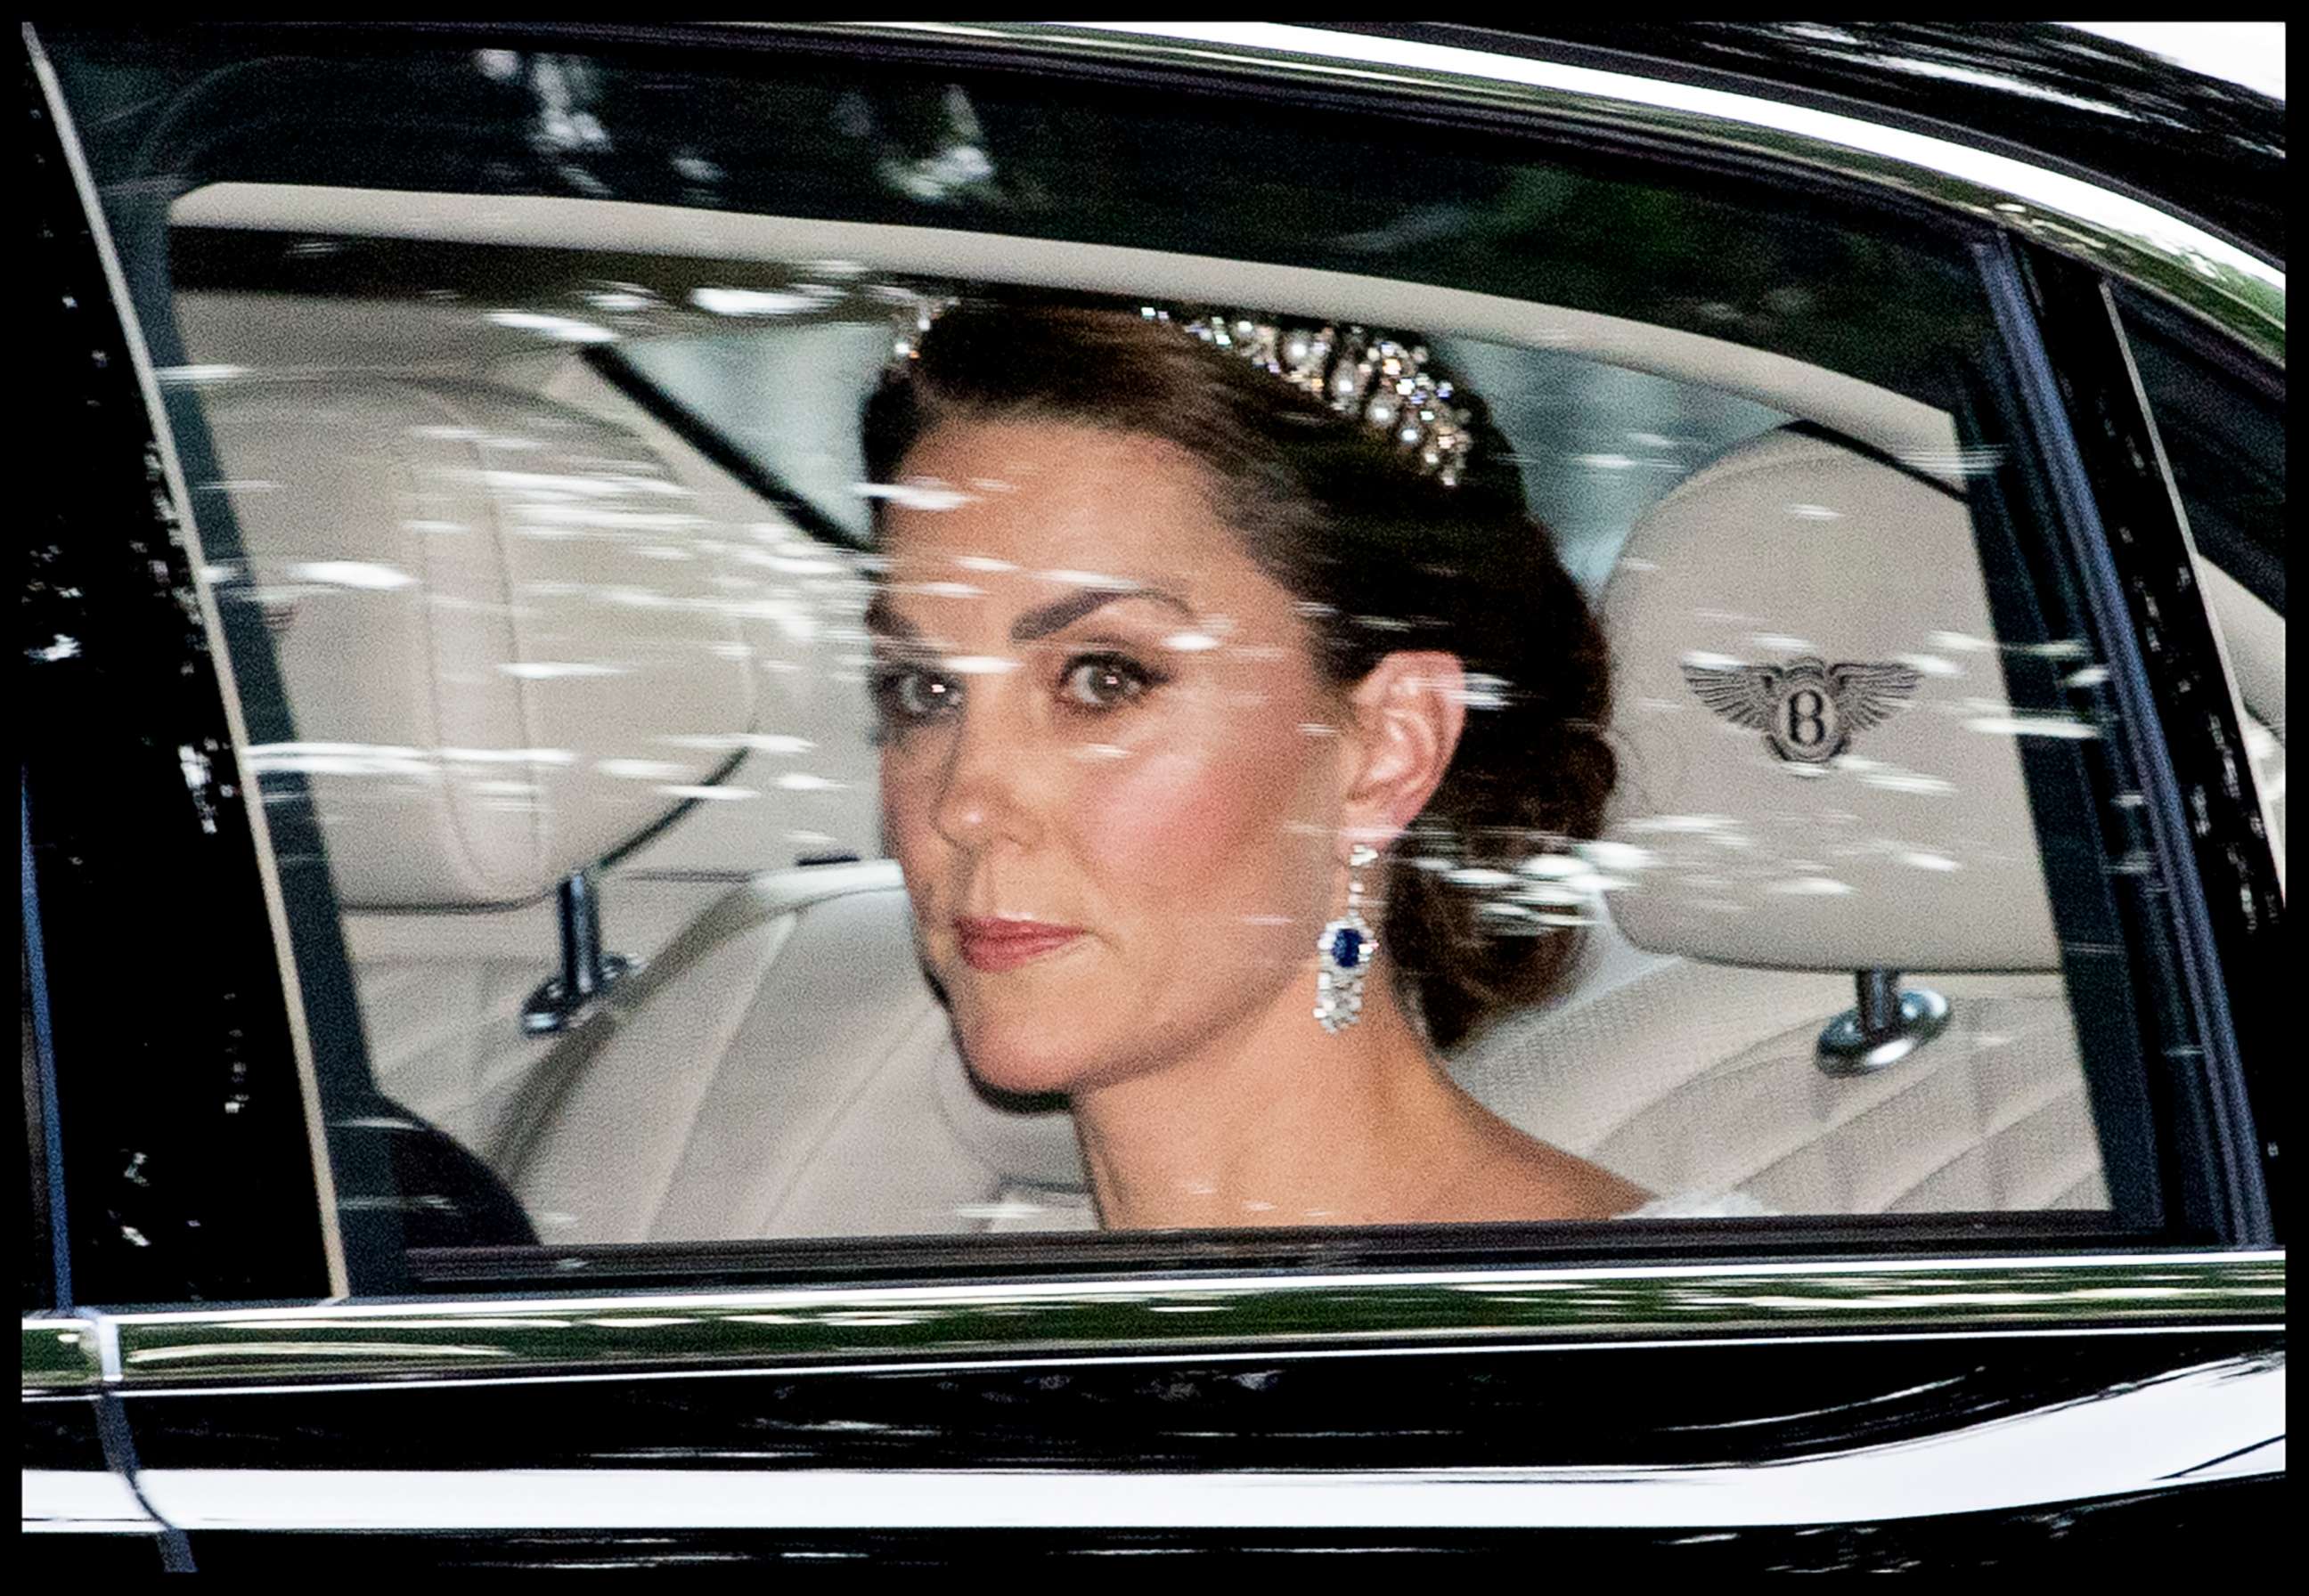 PHOTO: Catherine, the Duchess of Cambridge arrives at Buckingham Palace for the State visit of President Trump and the first lady, June 3, 2019. 